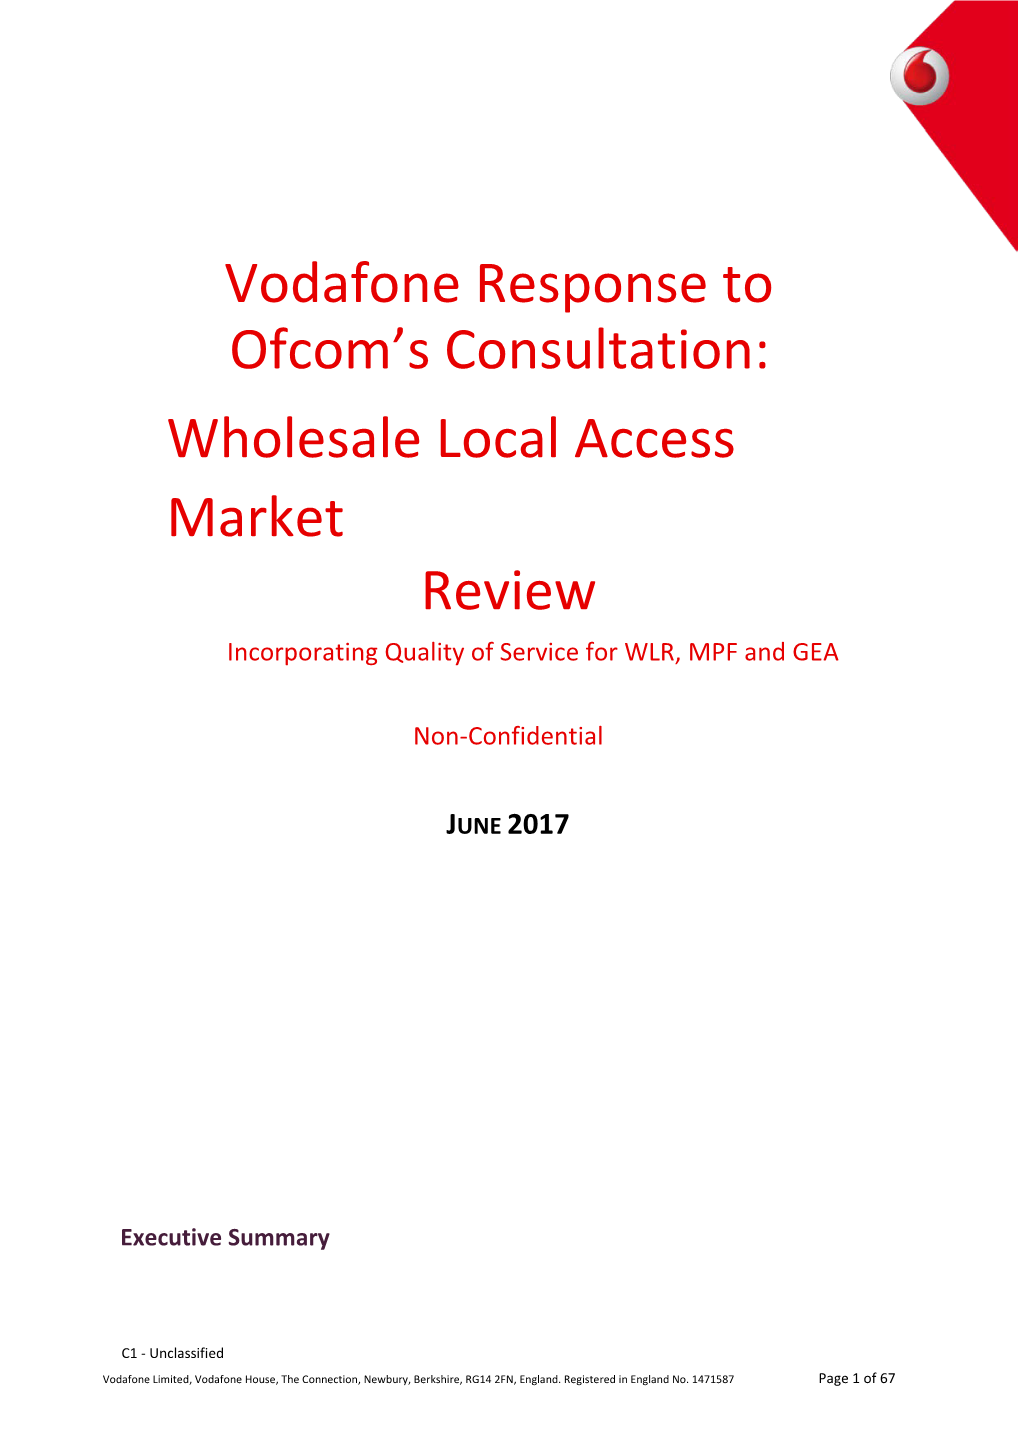 Vodafone Response to Ofcom's Consultation: Wholesale Local Access Market Review